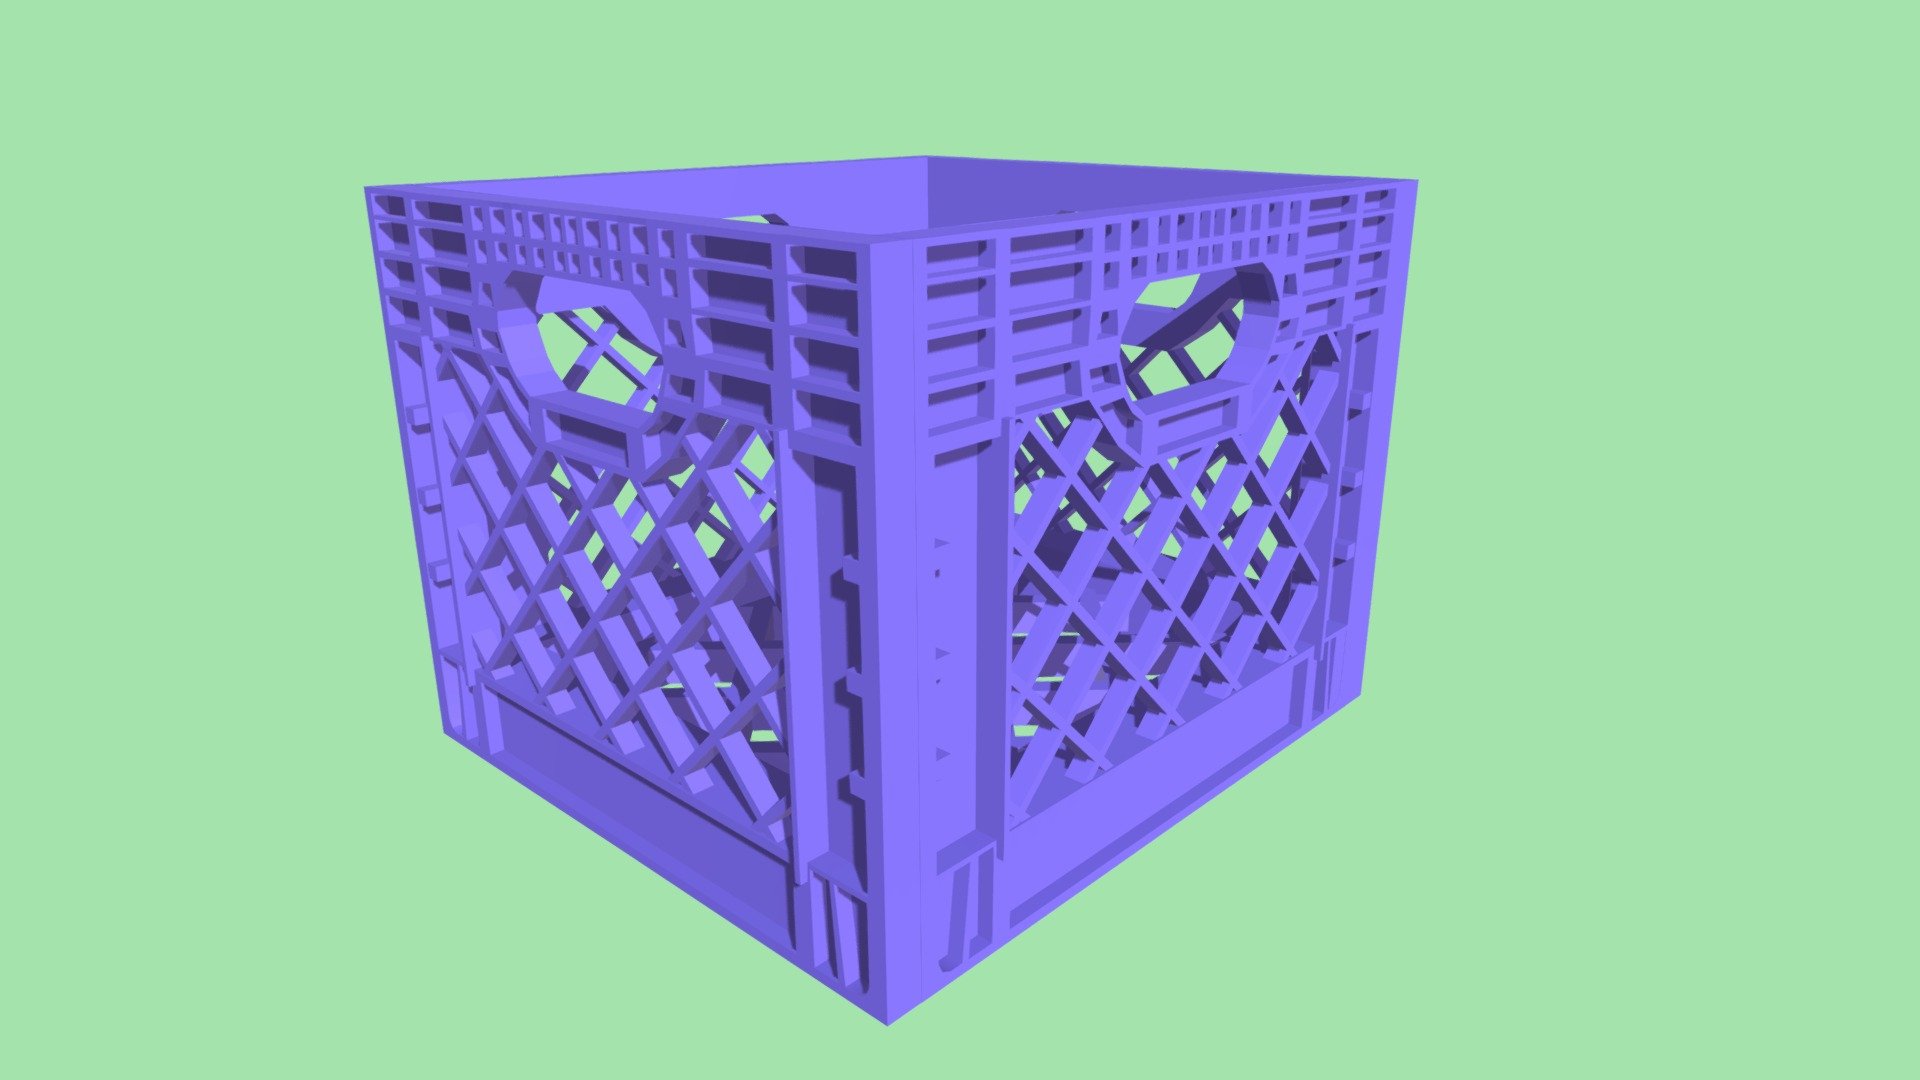 Created as a prop to go with the cabbage character. The client's game is a block pushing game that takes place in a grocery store, and we felt a milk crate was a fitting block 3d model